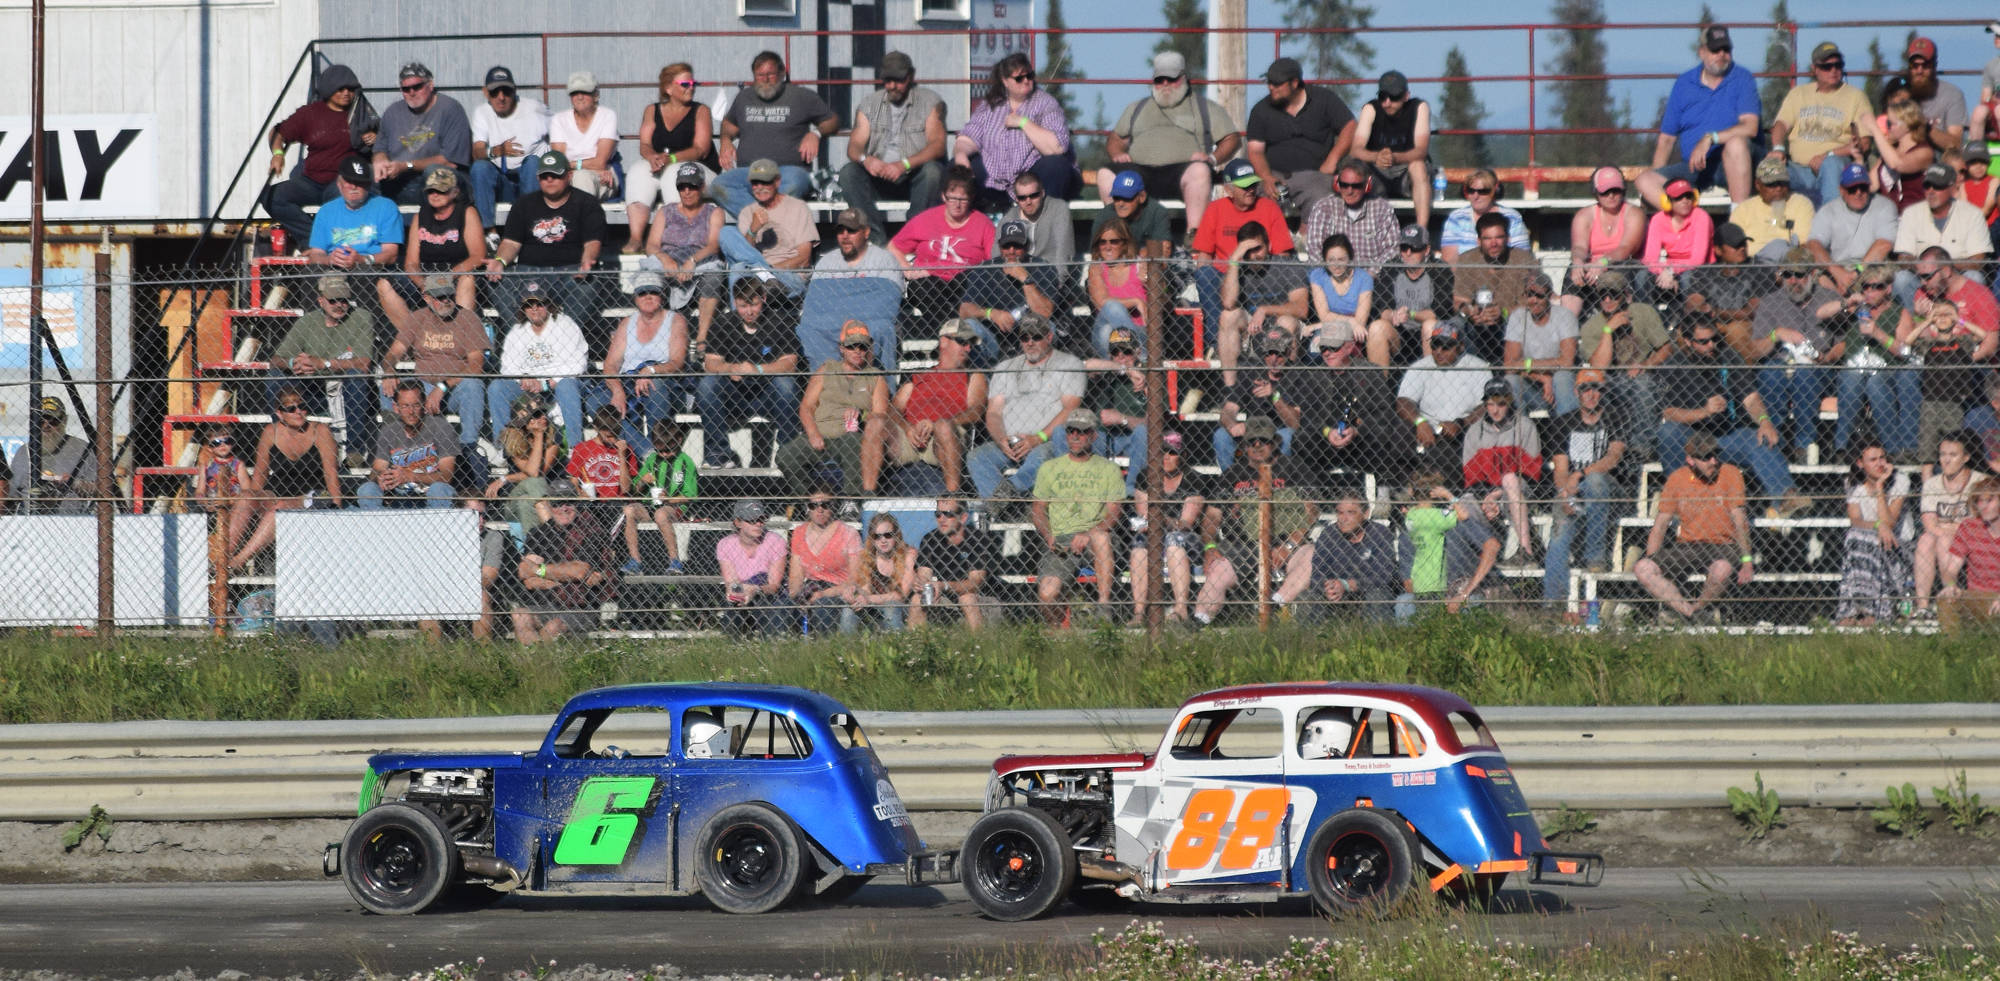 A full crowd watches as Legends drivers Brent Ramagoux (6) and Bryan Barber race for position during the running of the Alaska Dirt Track Shootout held Saturday at Twin City Raceway in Kenai. (Photo by Joey Klecka/Peninsula Clarion)